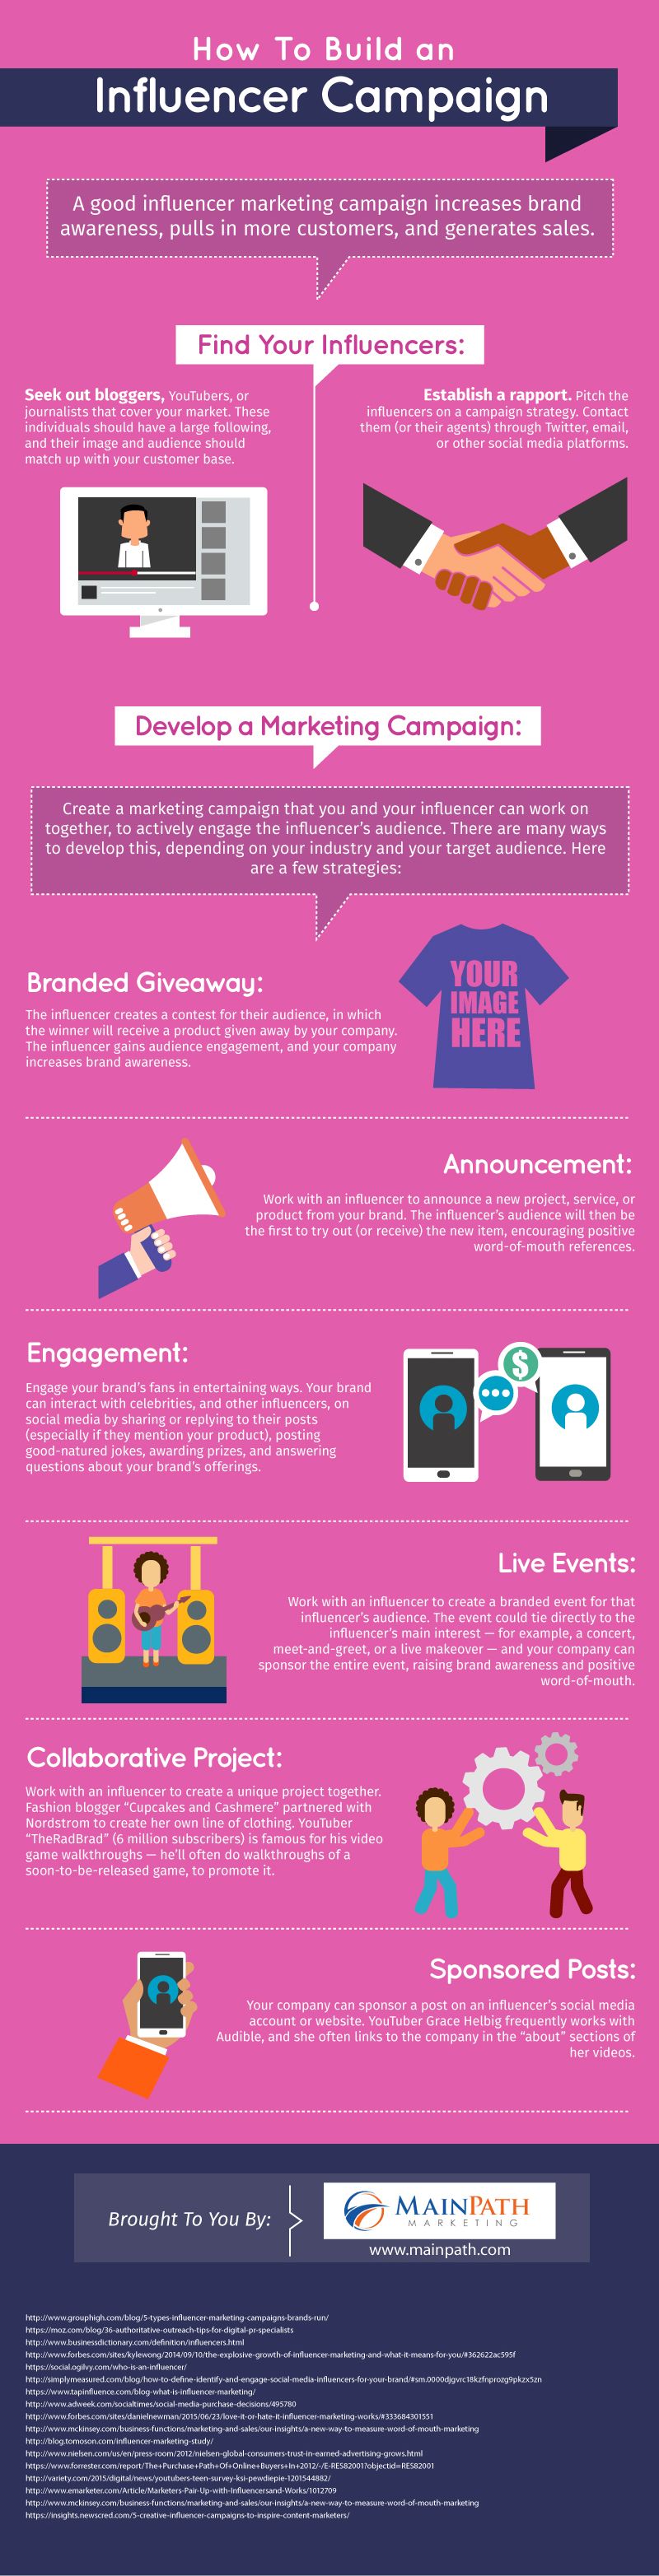 Guide to influencer marketing infographic copy